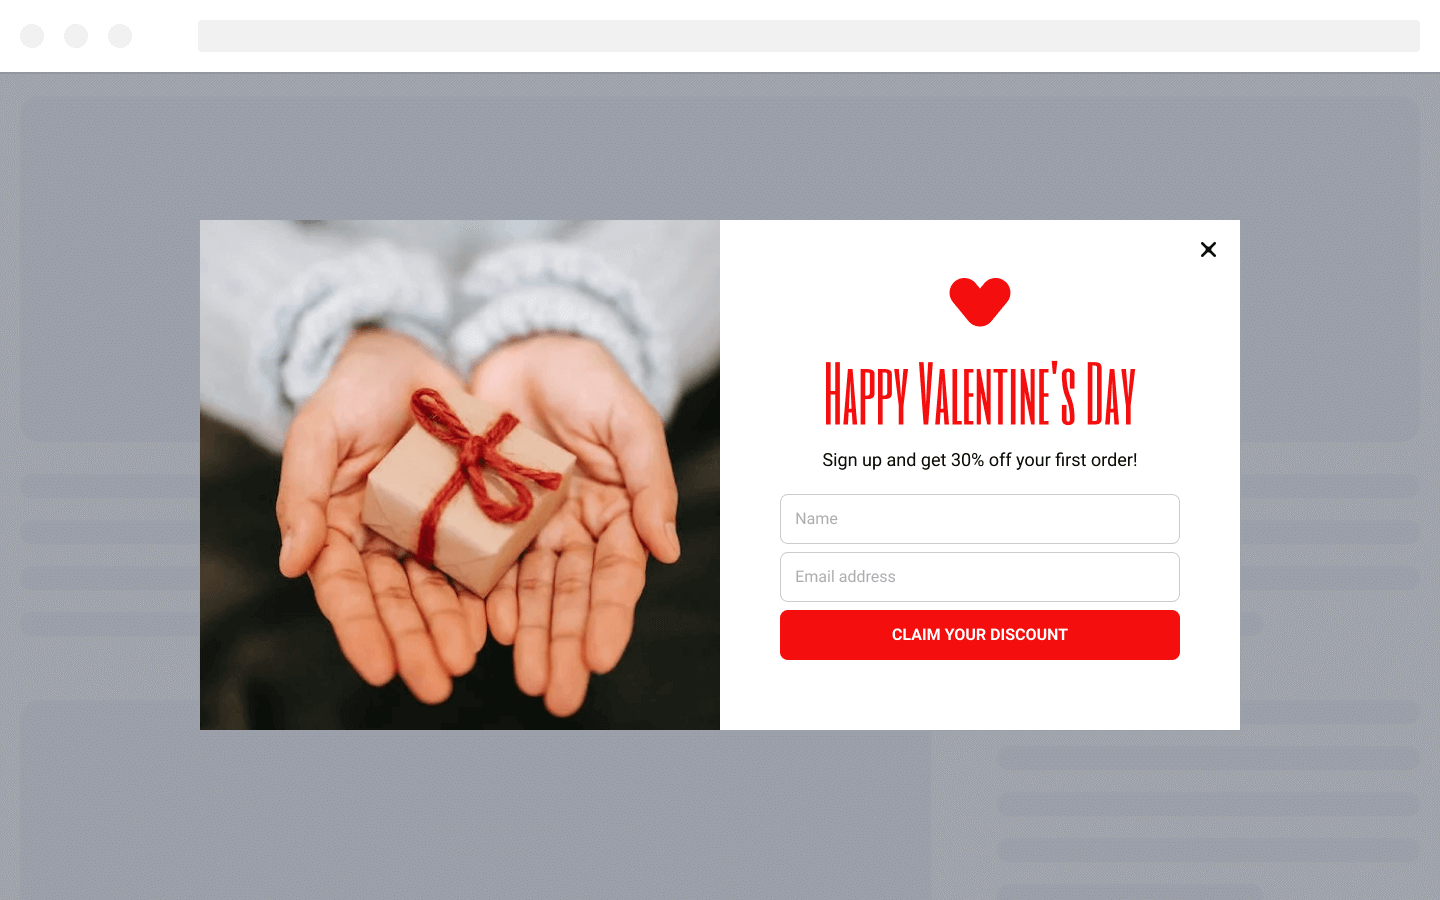 Offer a Discount to New Visitors on Valentine’s Day with an Opt-in Popup